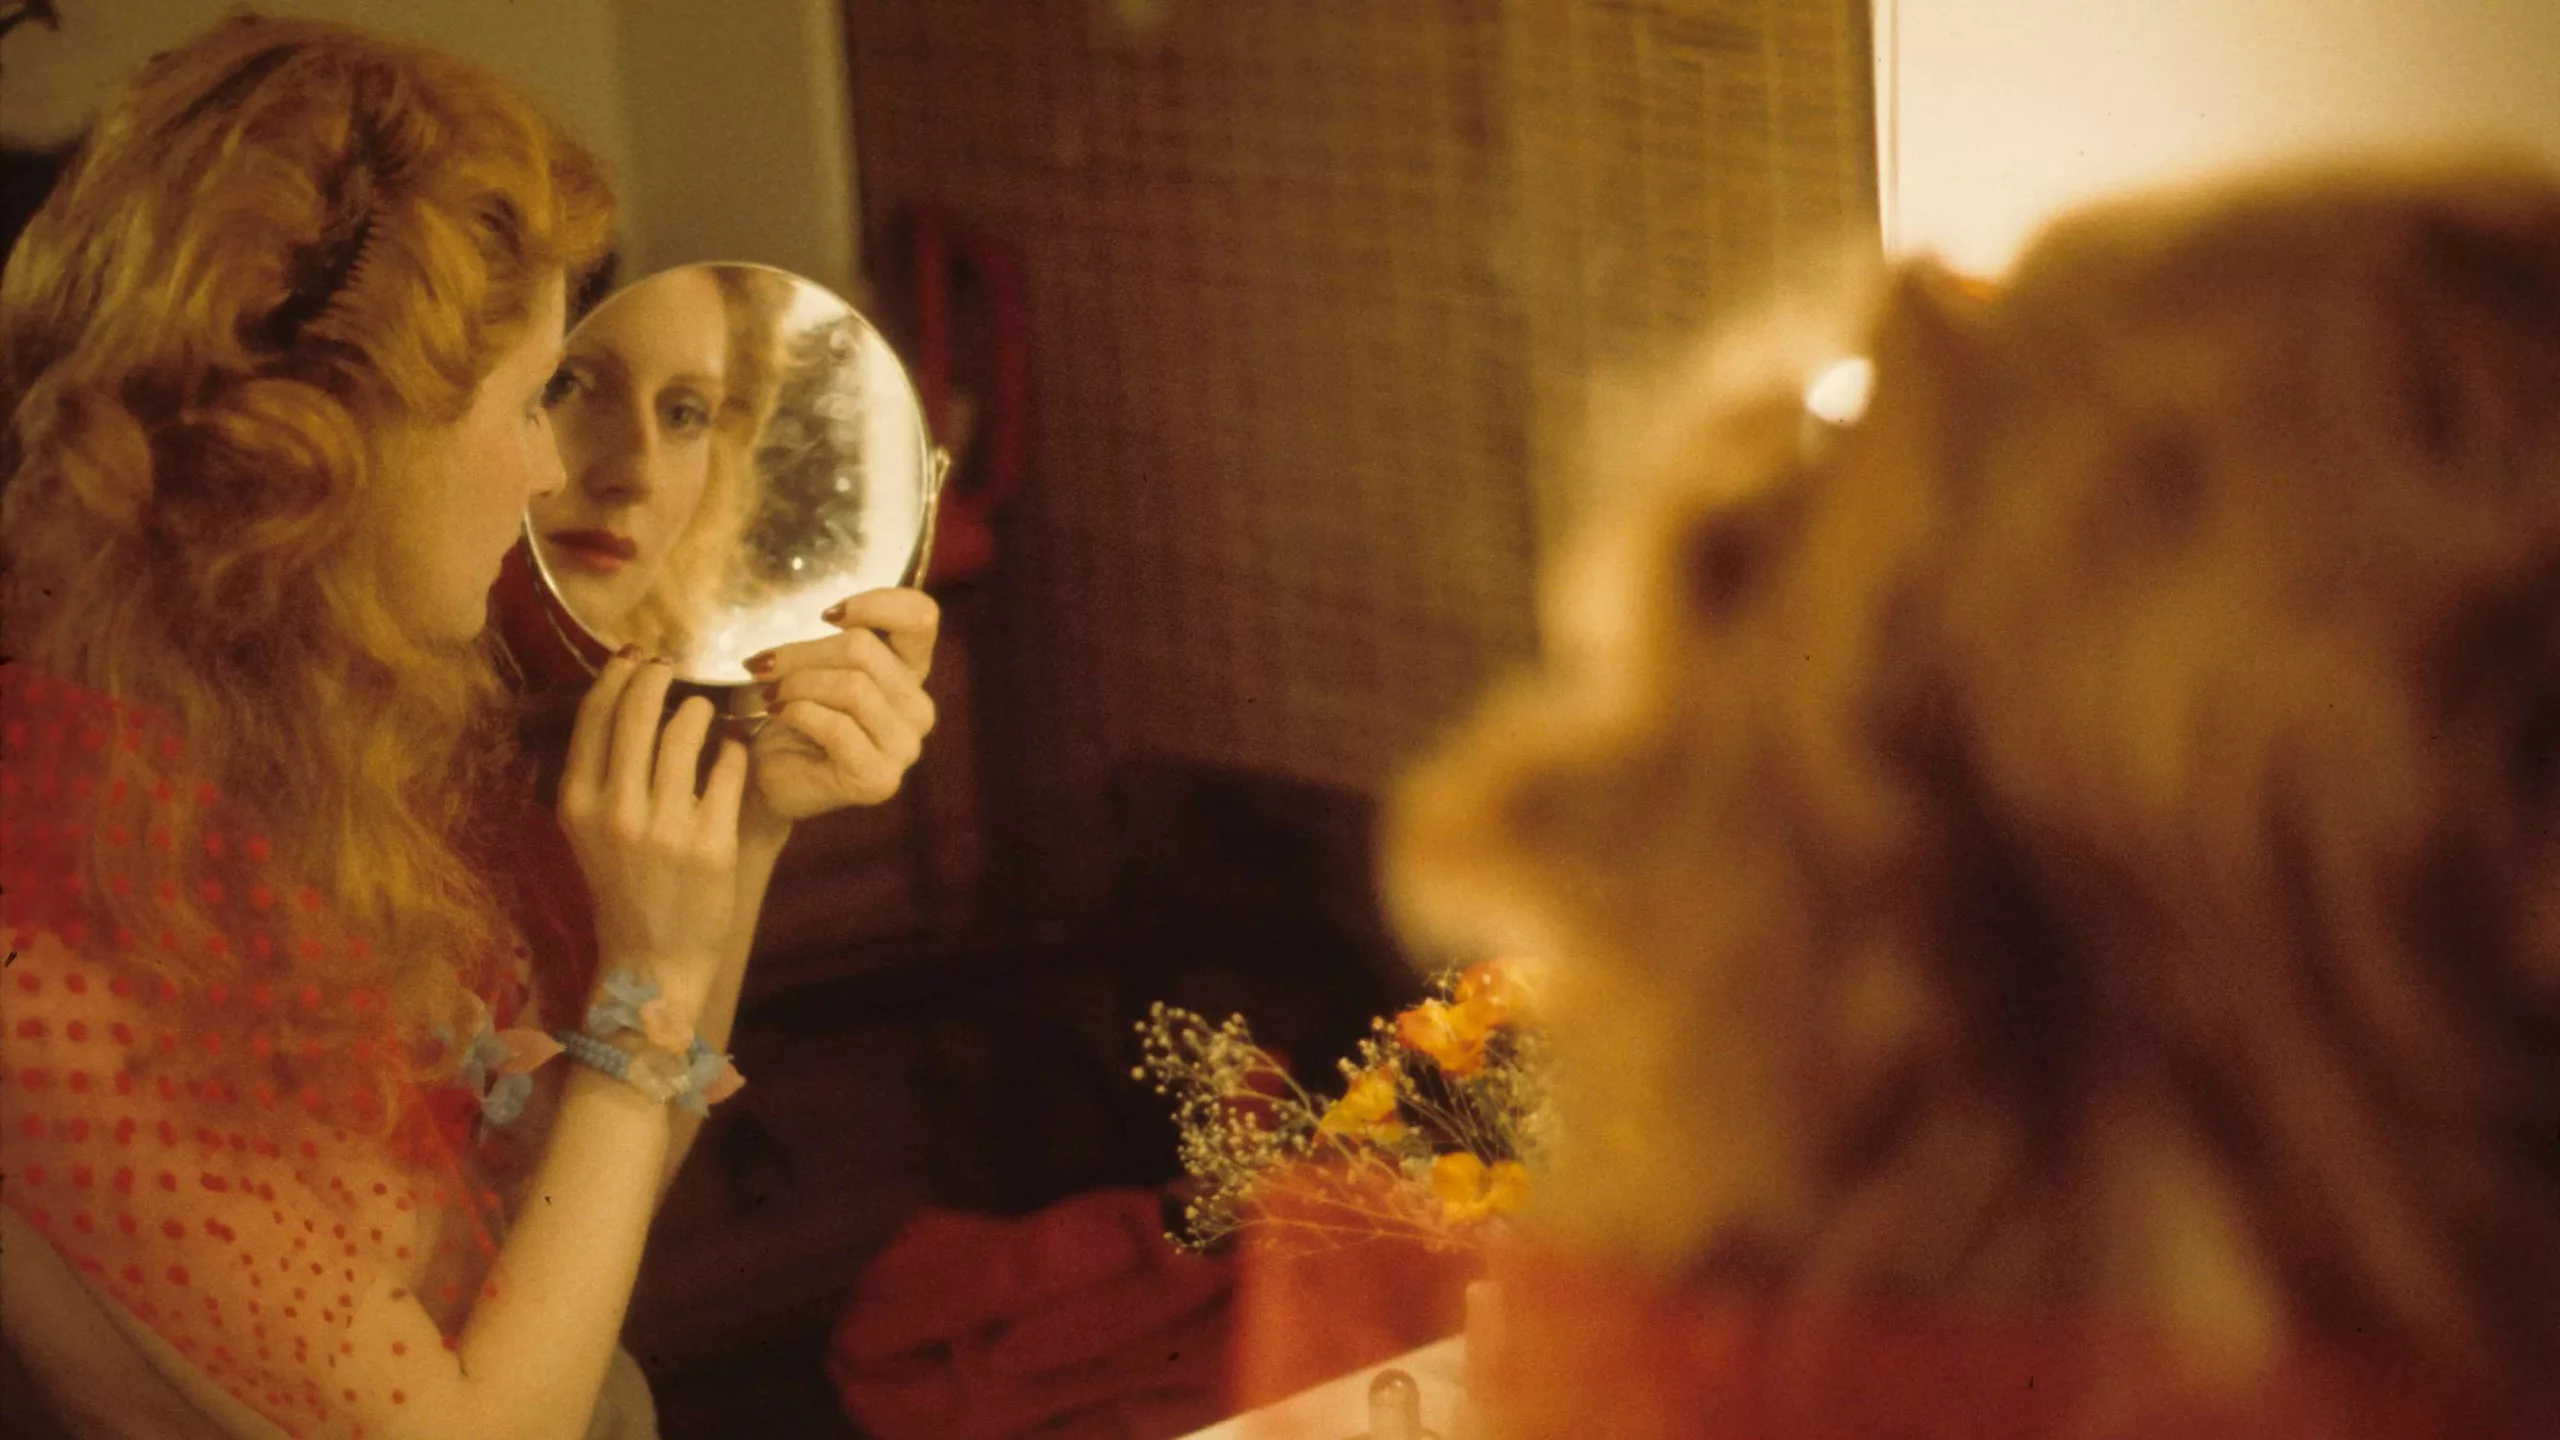 A woman with red hair looks at her own reflection from several mirrors.